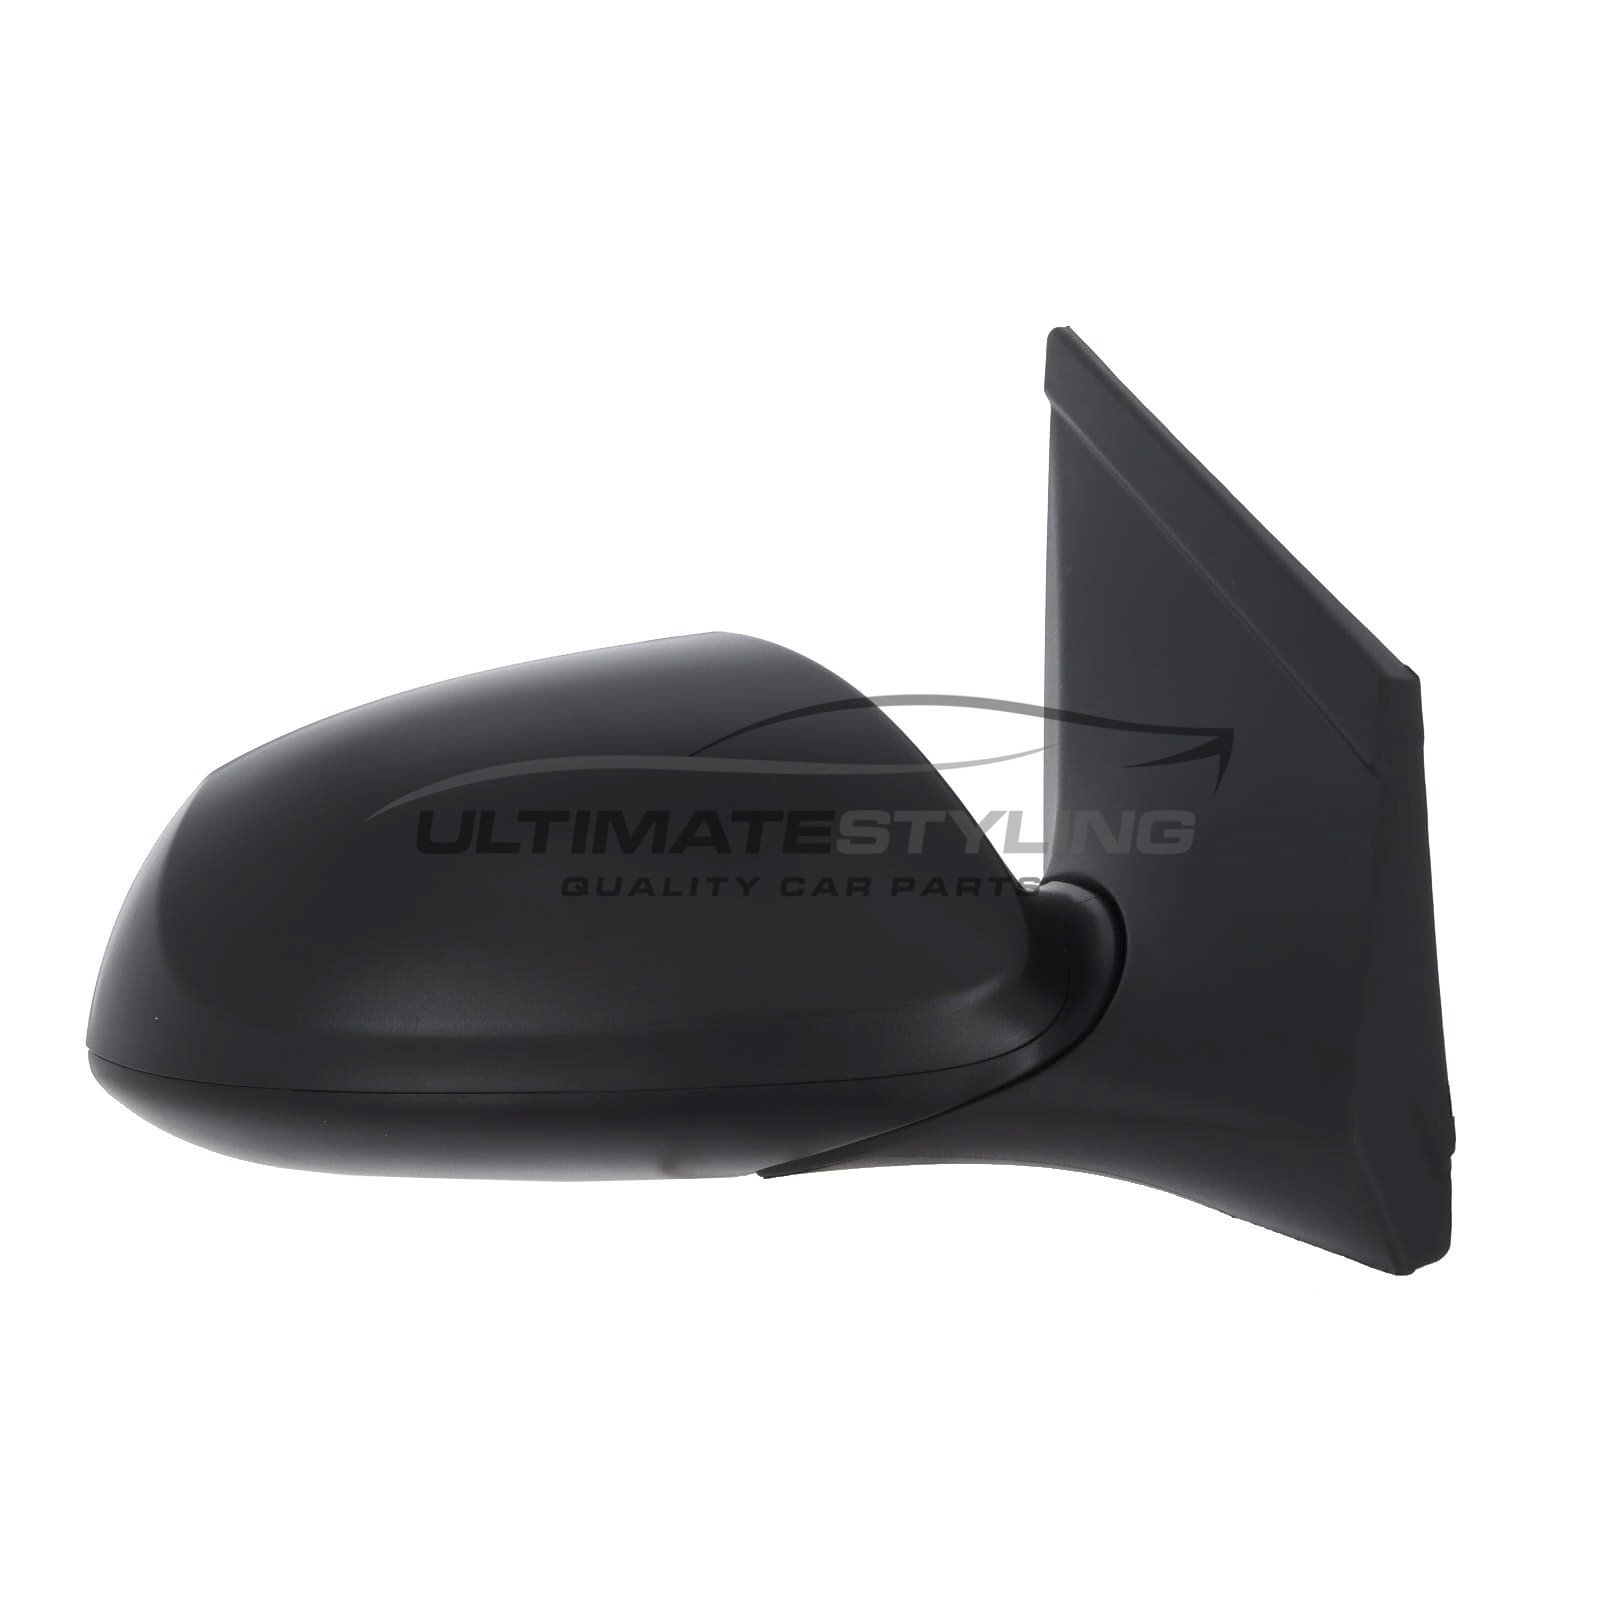 Hyundai i10 Wing Mirror / Door Mirror - Drivers Side (RH) - Cable adjustment - Non-Heated Glass - Black - Textured